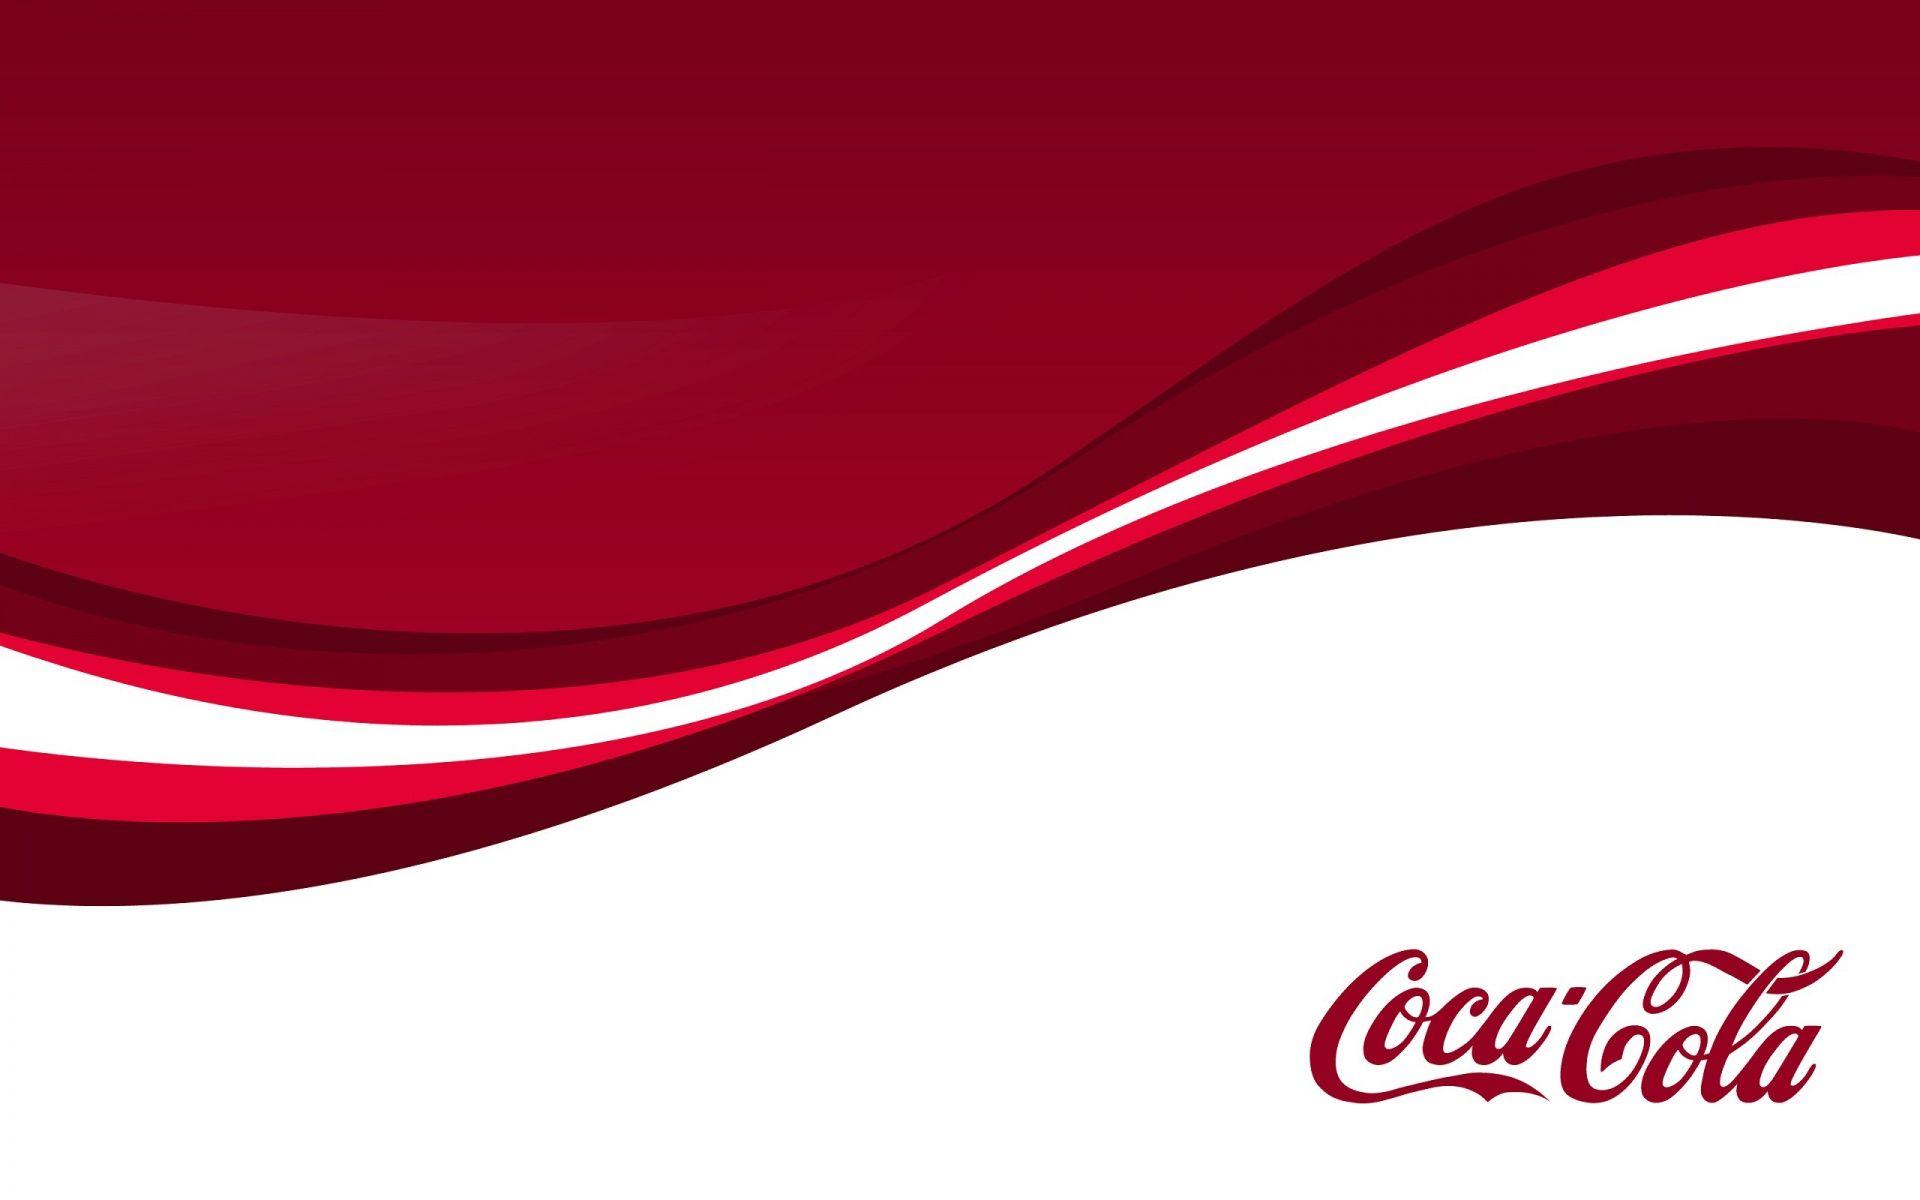 Coca-Cola Backgrounds - Wallpaper Cave In Coca Cola Powerpoint Template